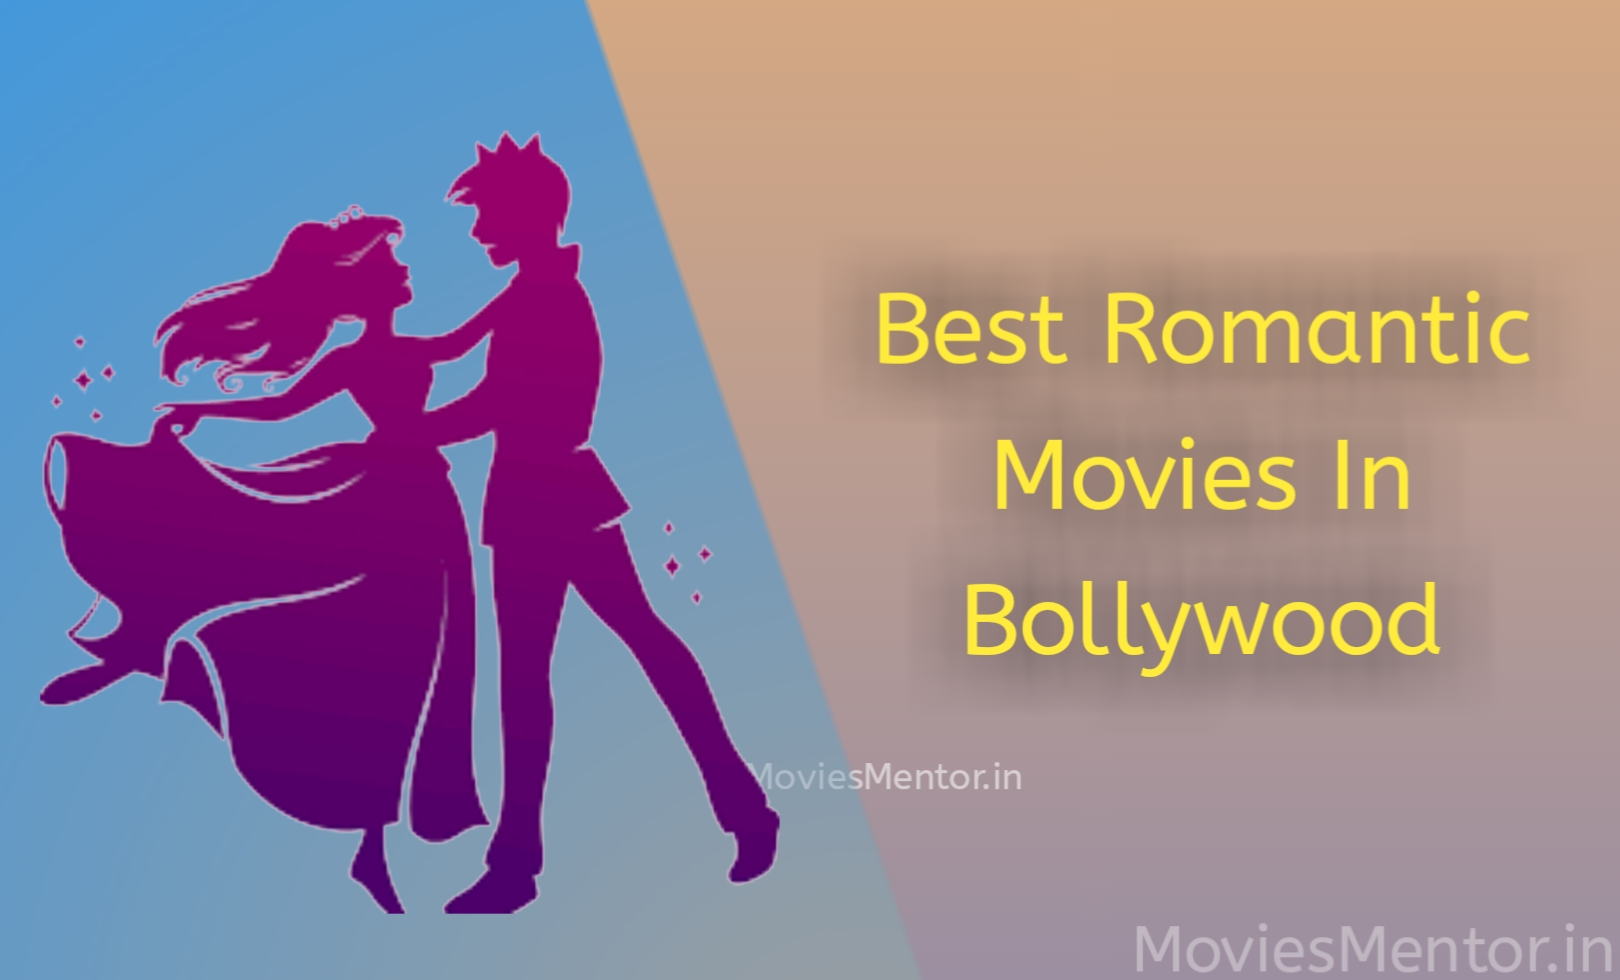 Best Romantic Movies In Bollywood